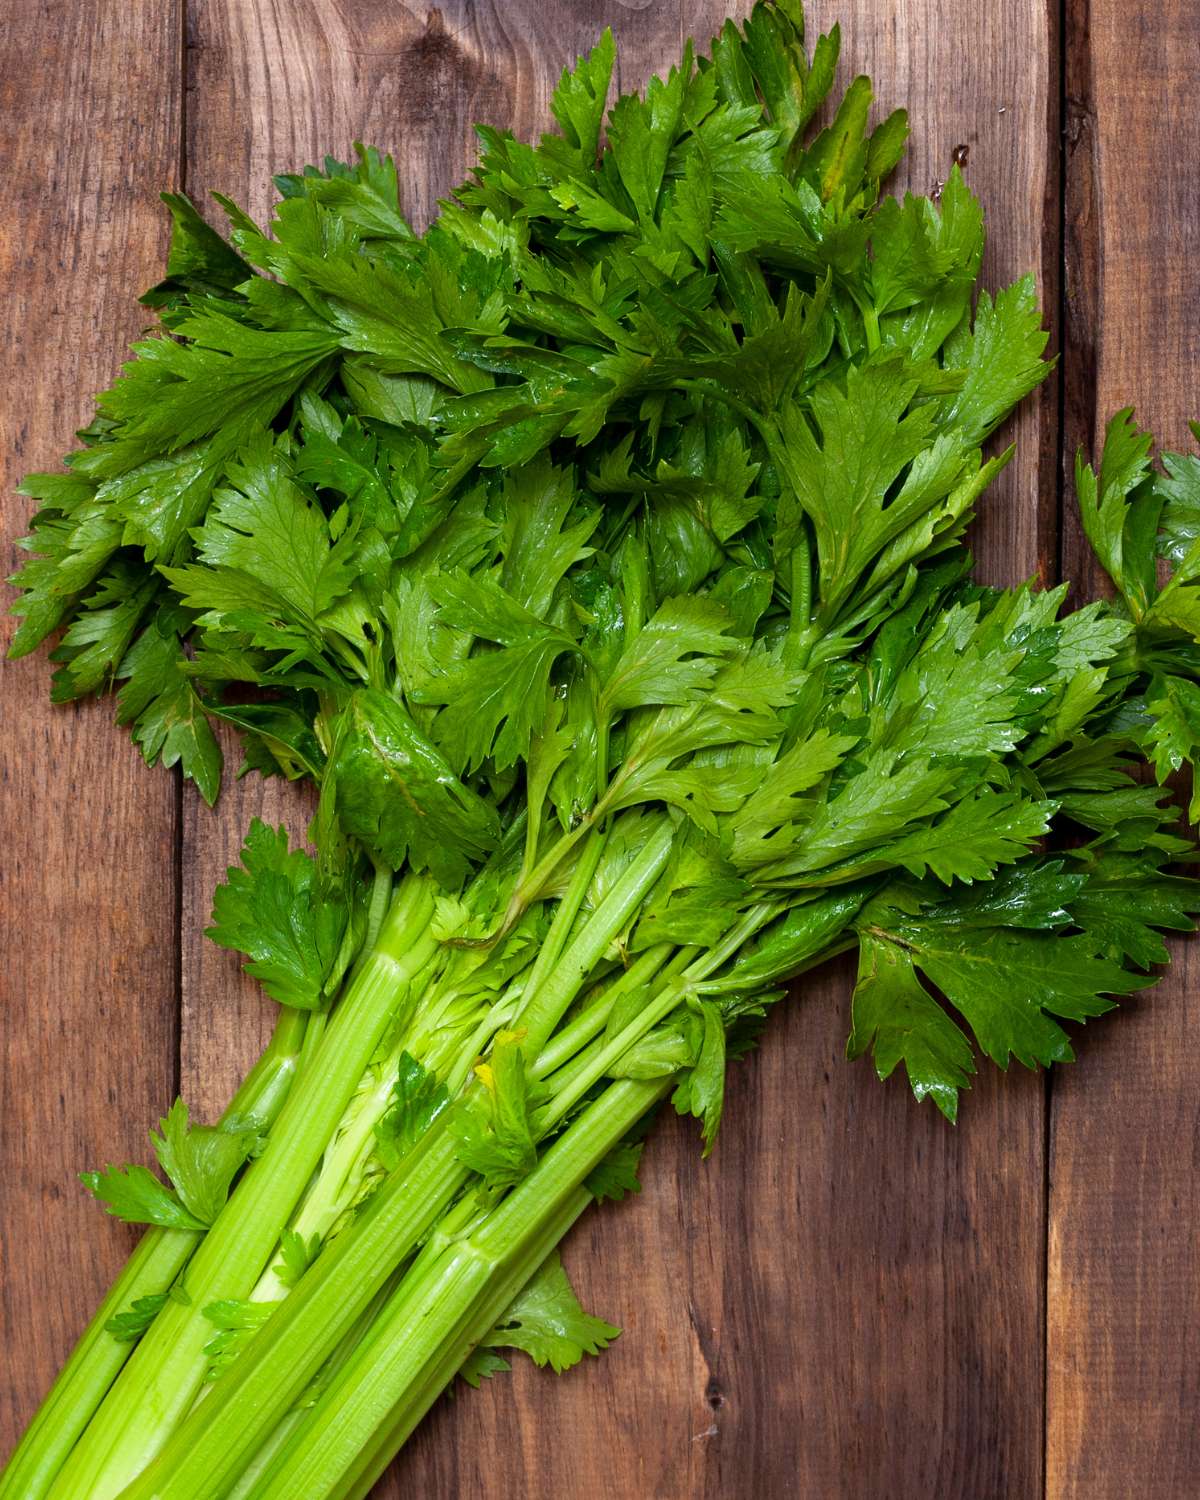 Celery stalks with celery leaves on a wooden table.